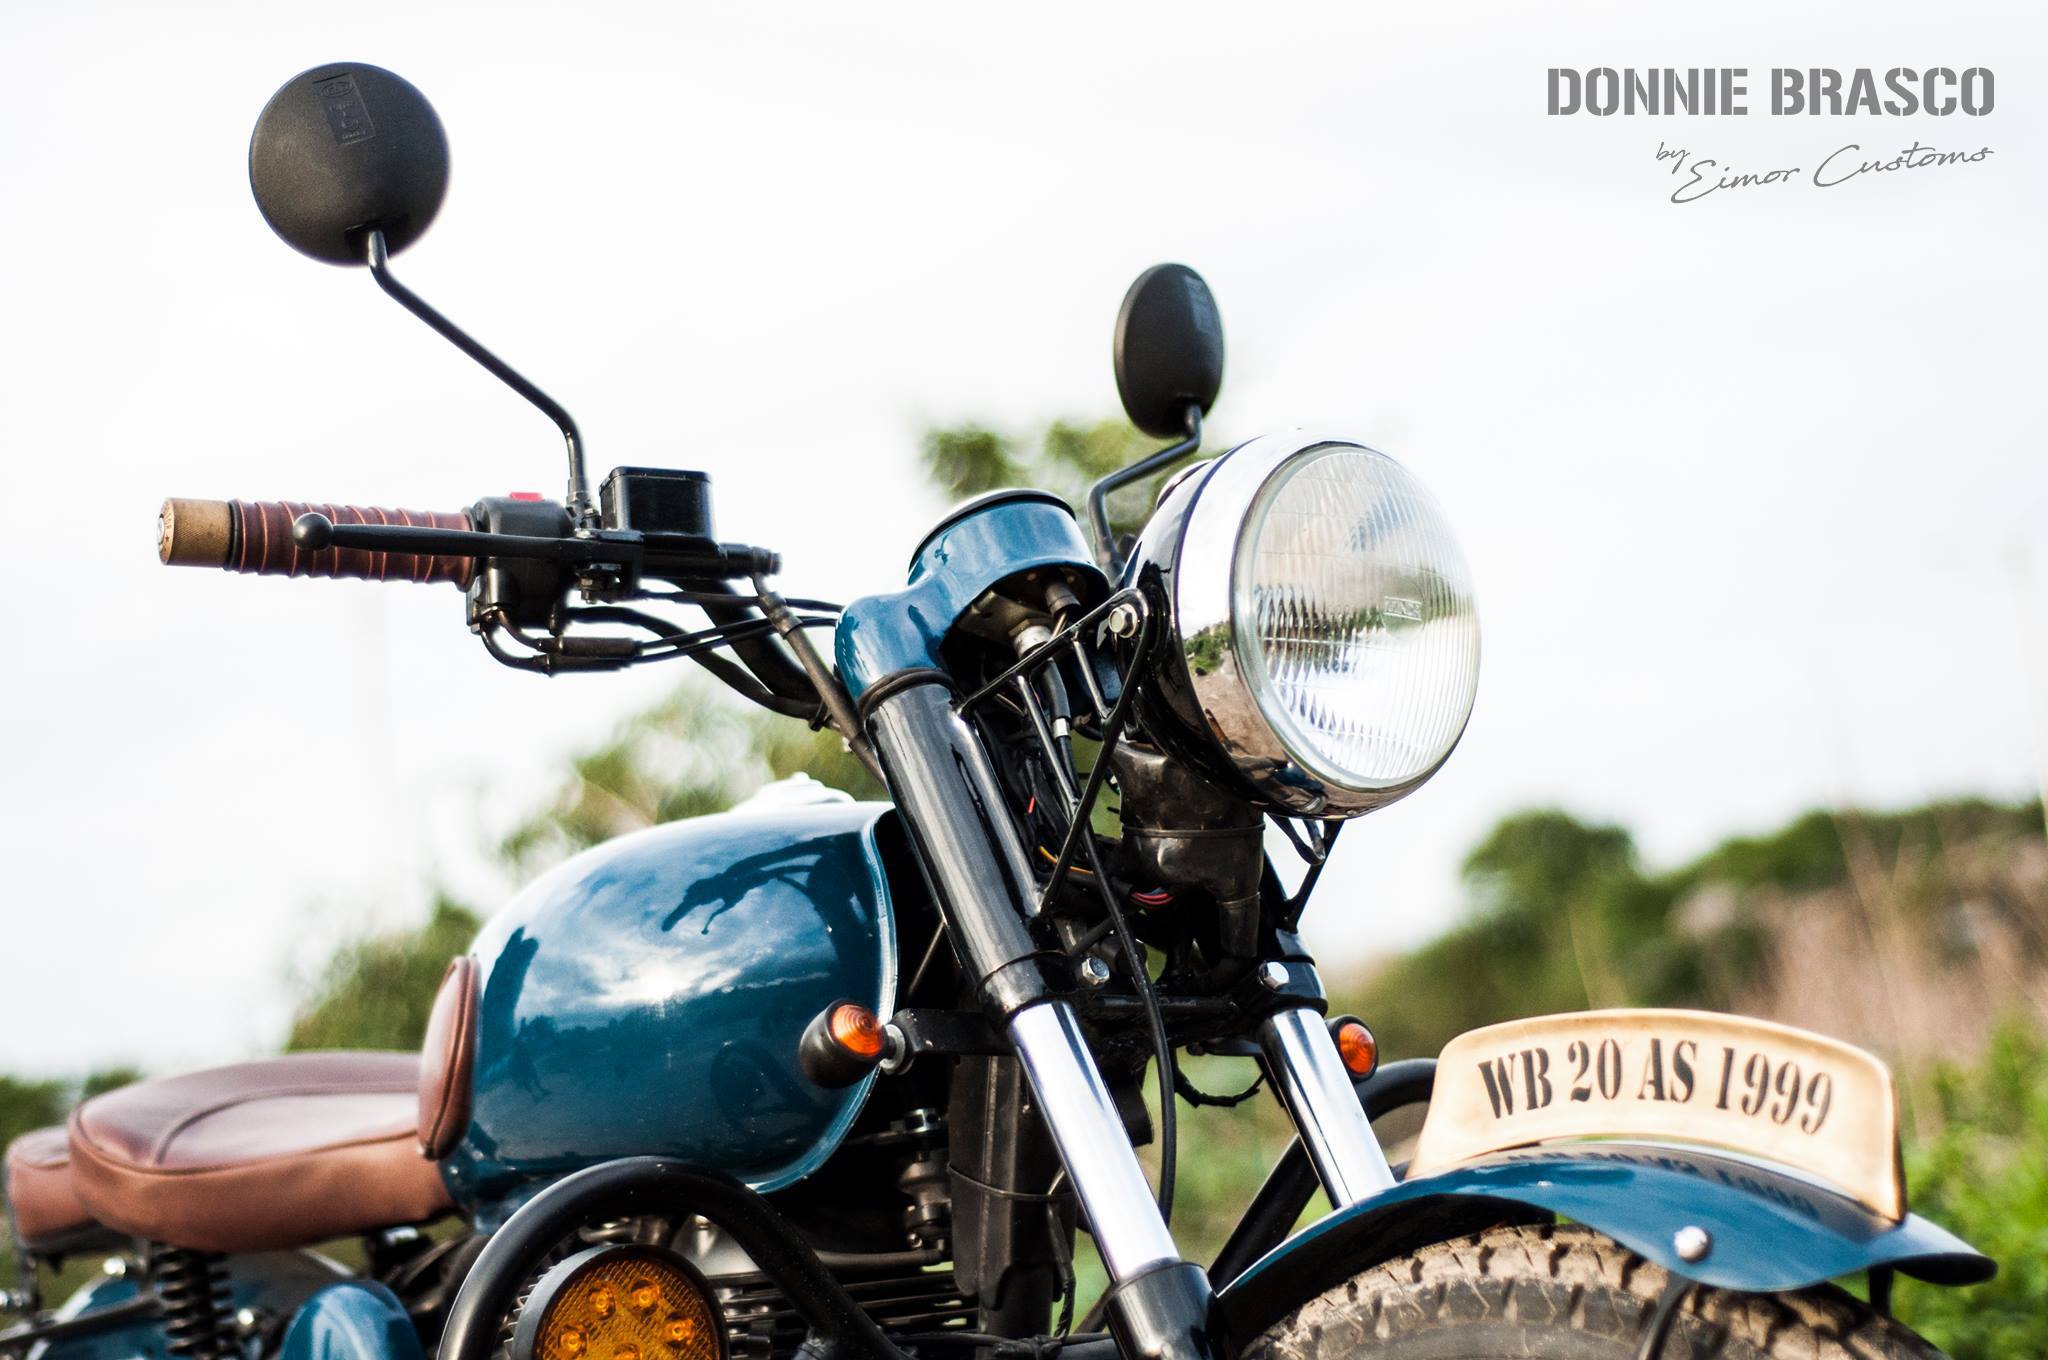 Royal Enfield Classic 'Donnie Brasco' Edition Details and Photos - close up